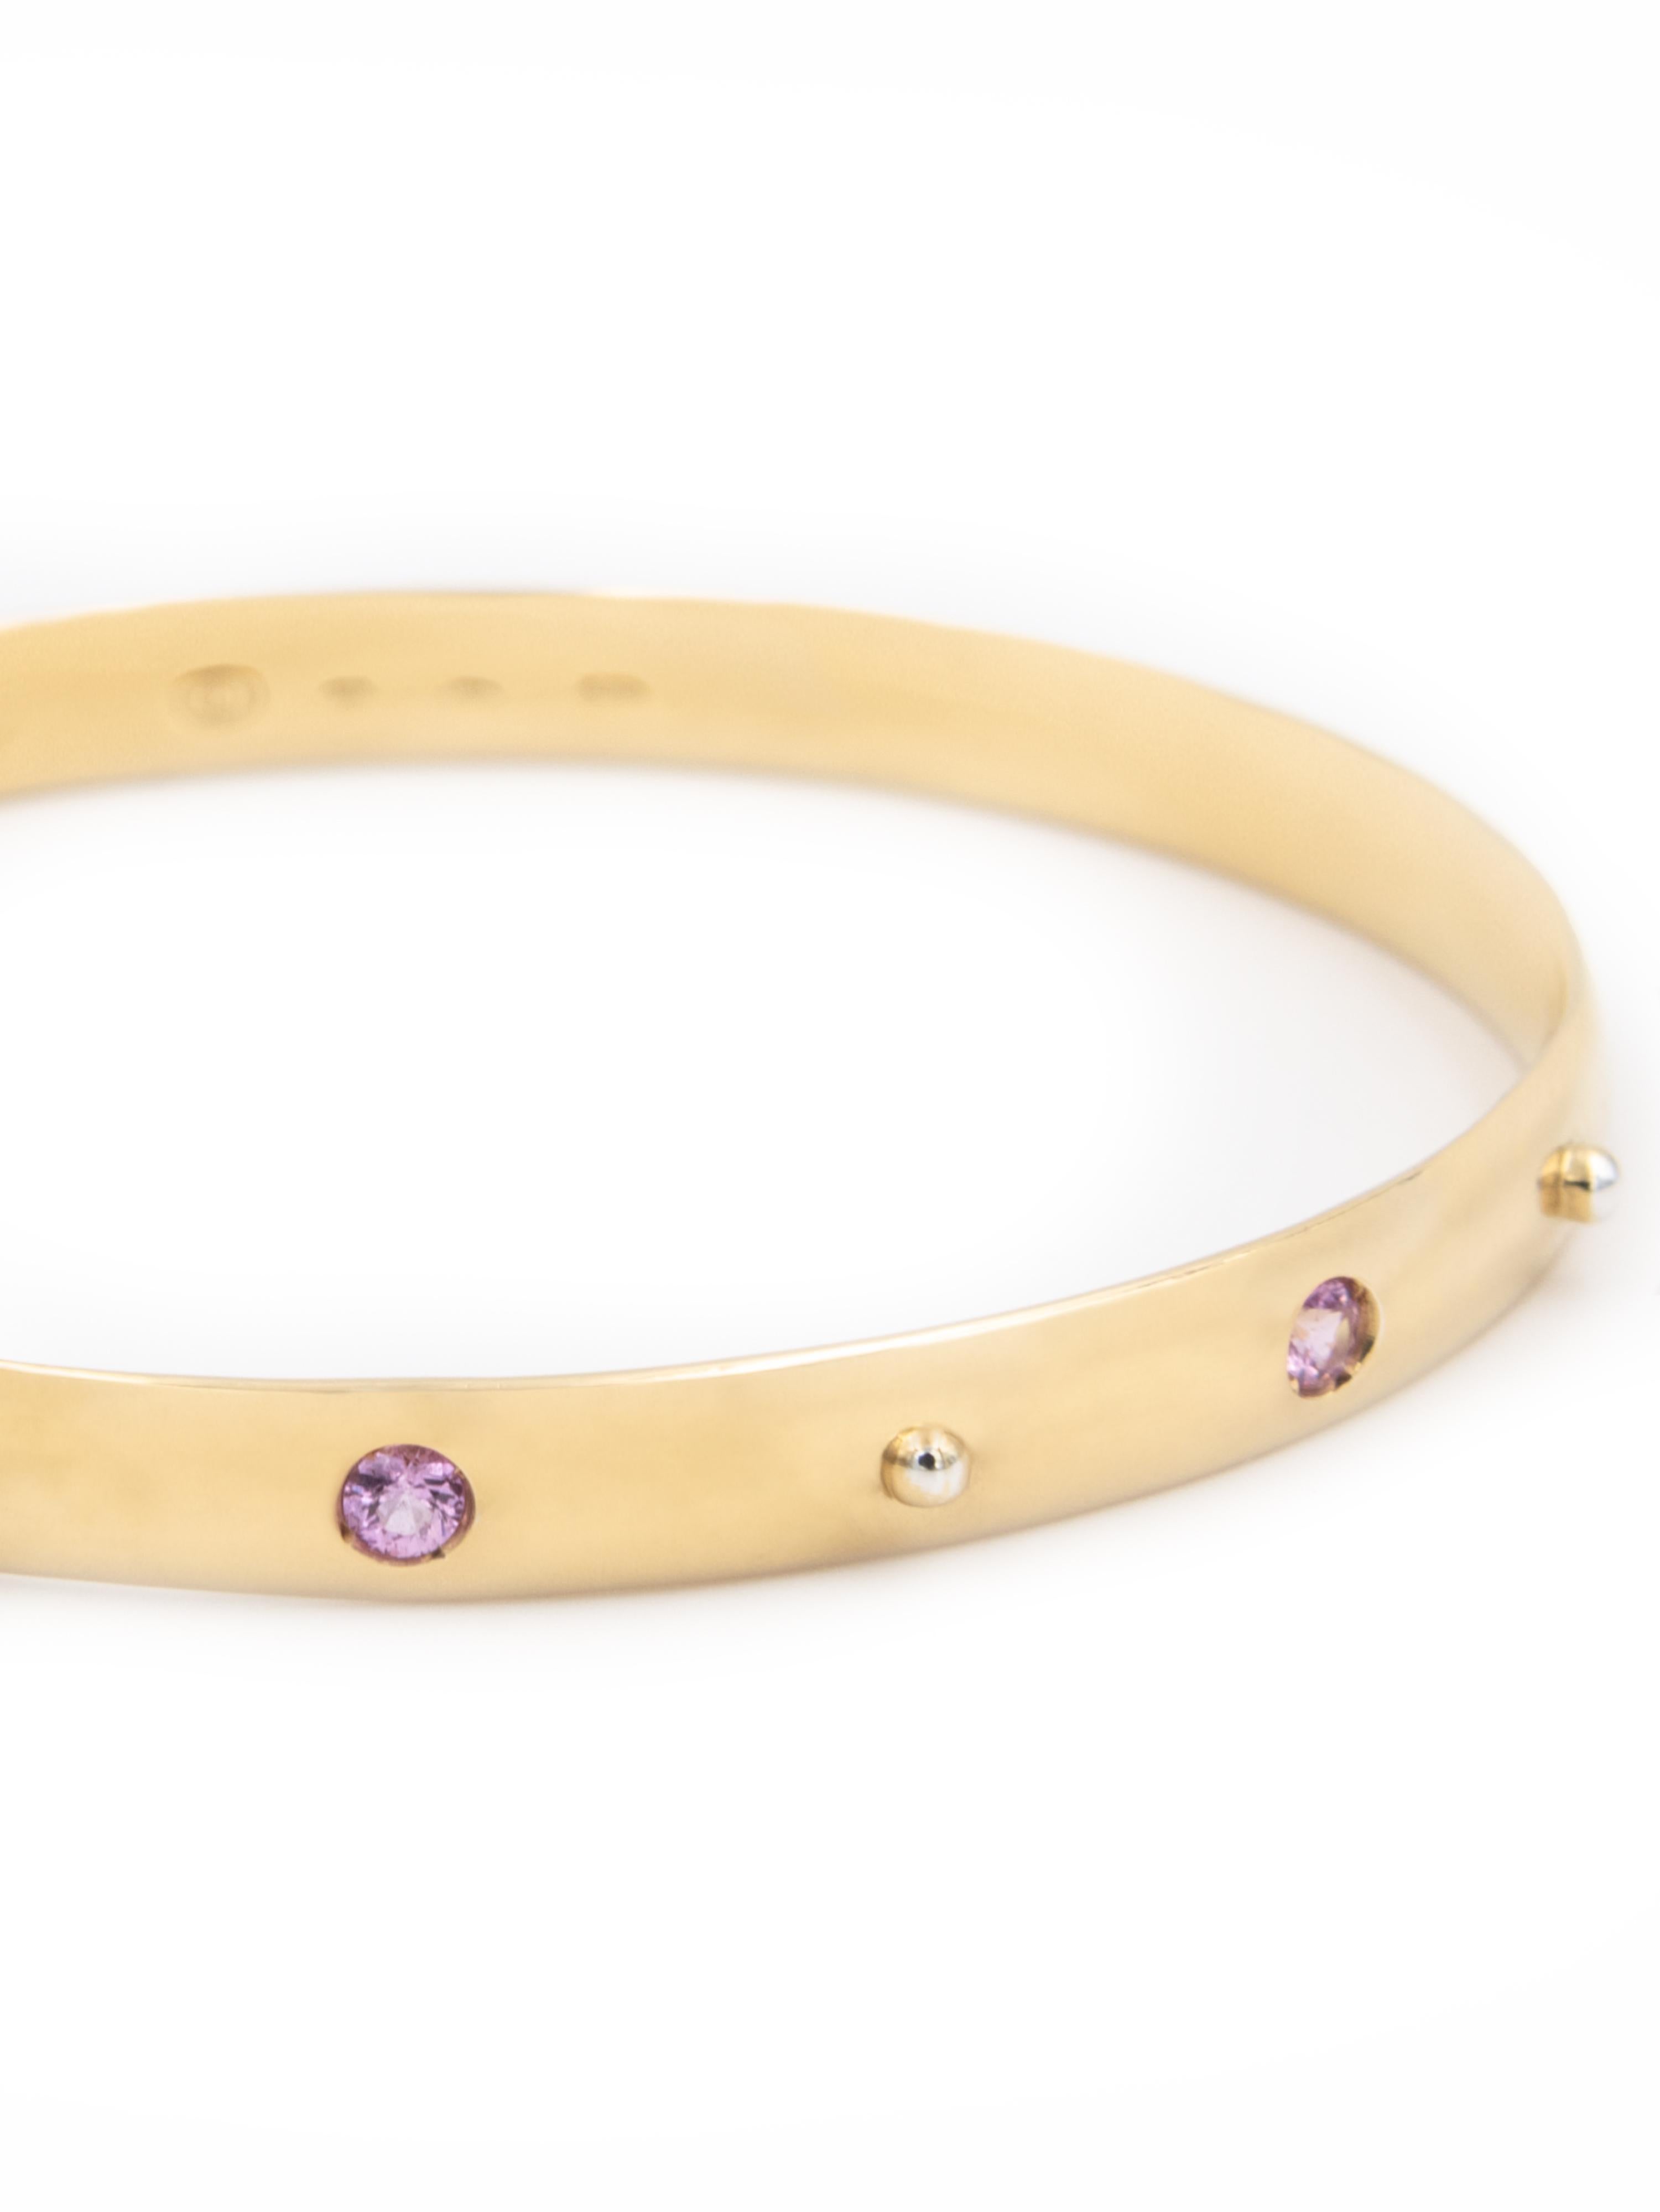 18 karat yellow gold bangle stacking bracelet with 0,3-carat of pink sapphires.  
  
This bracelet is available in a standard diameter of 6,25 cm (2,46 inch), intended to fit most wrists.

Perfect worn alone or for stacking with the other stacking